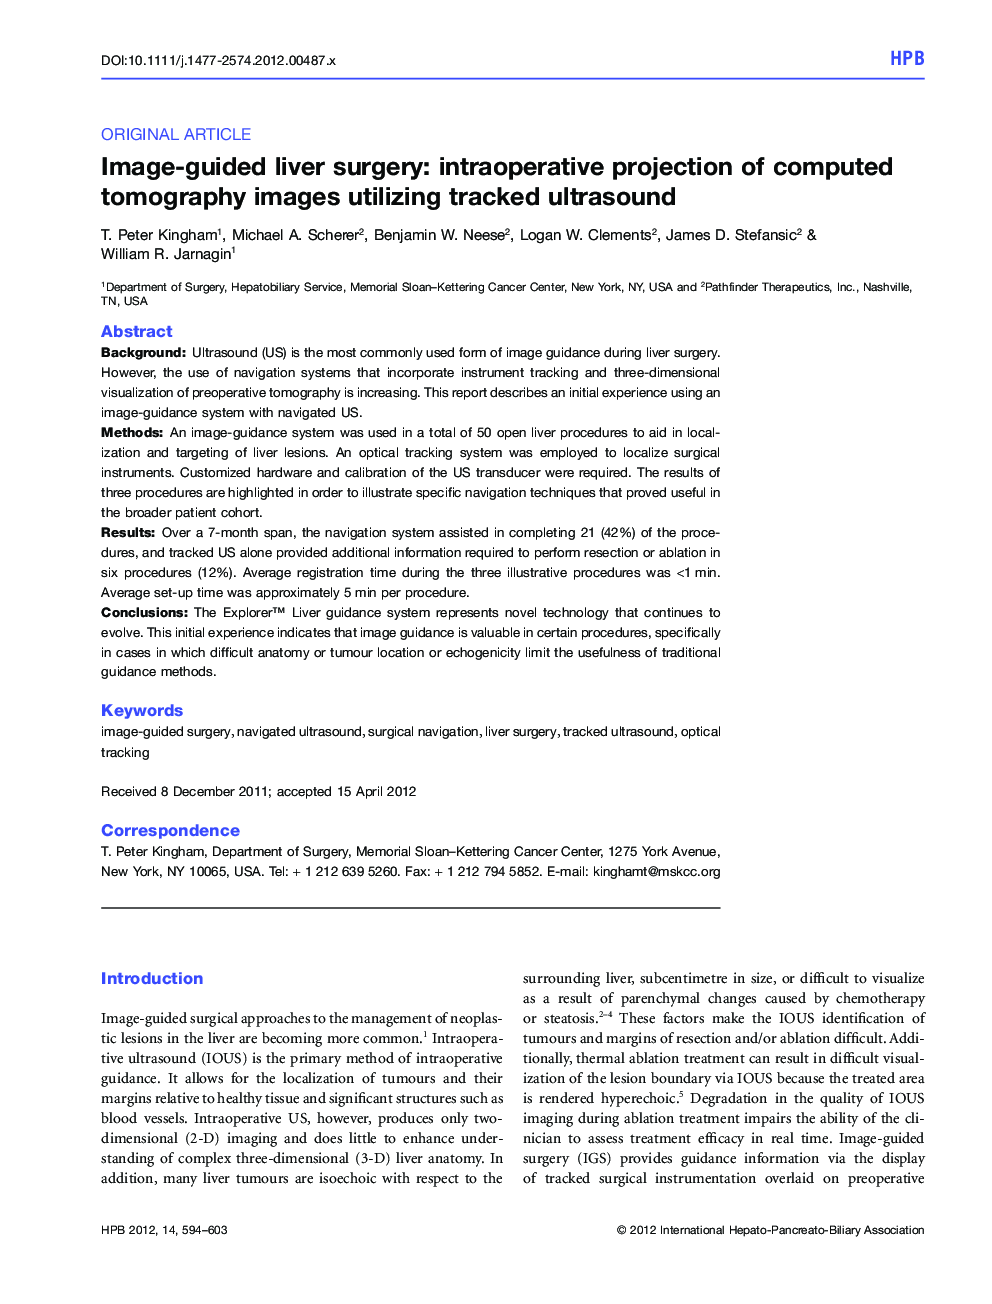 Image-guided liver surgery: intraoperative projection of computed tomography images utilizing tracked ultrasound